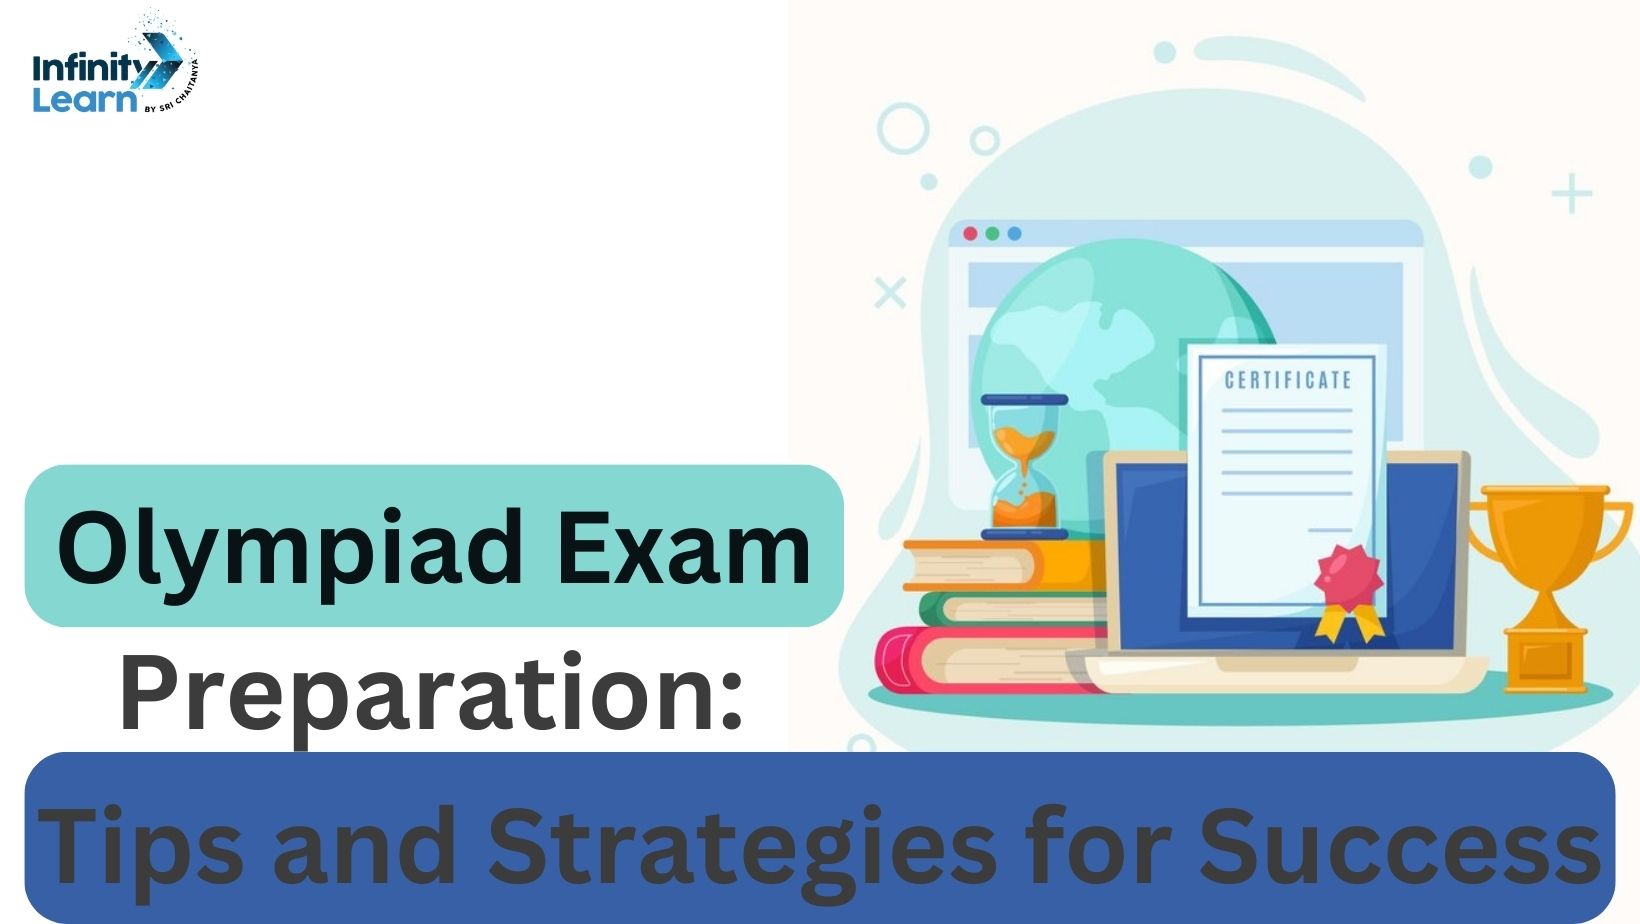 Olympiad Exam Preparation: Tips and Strategies for Success